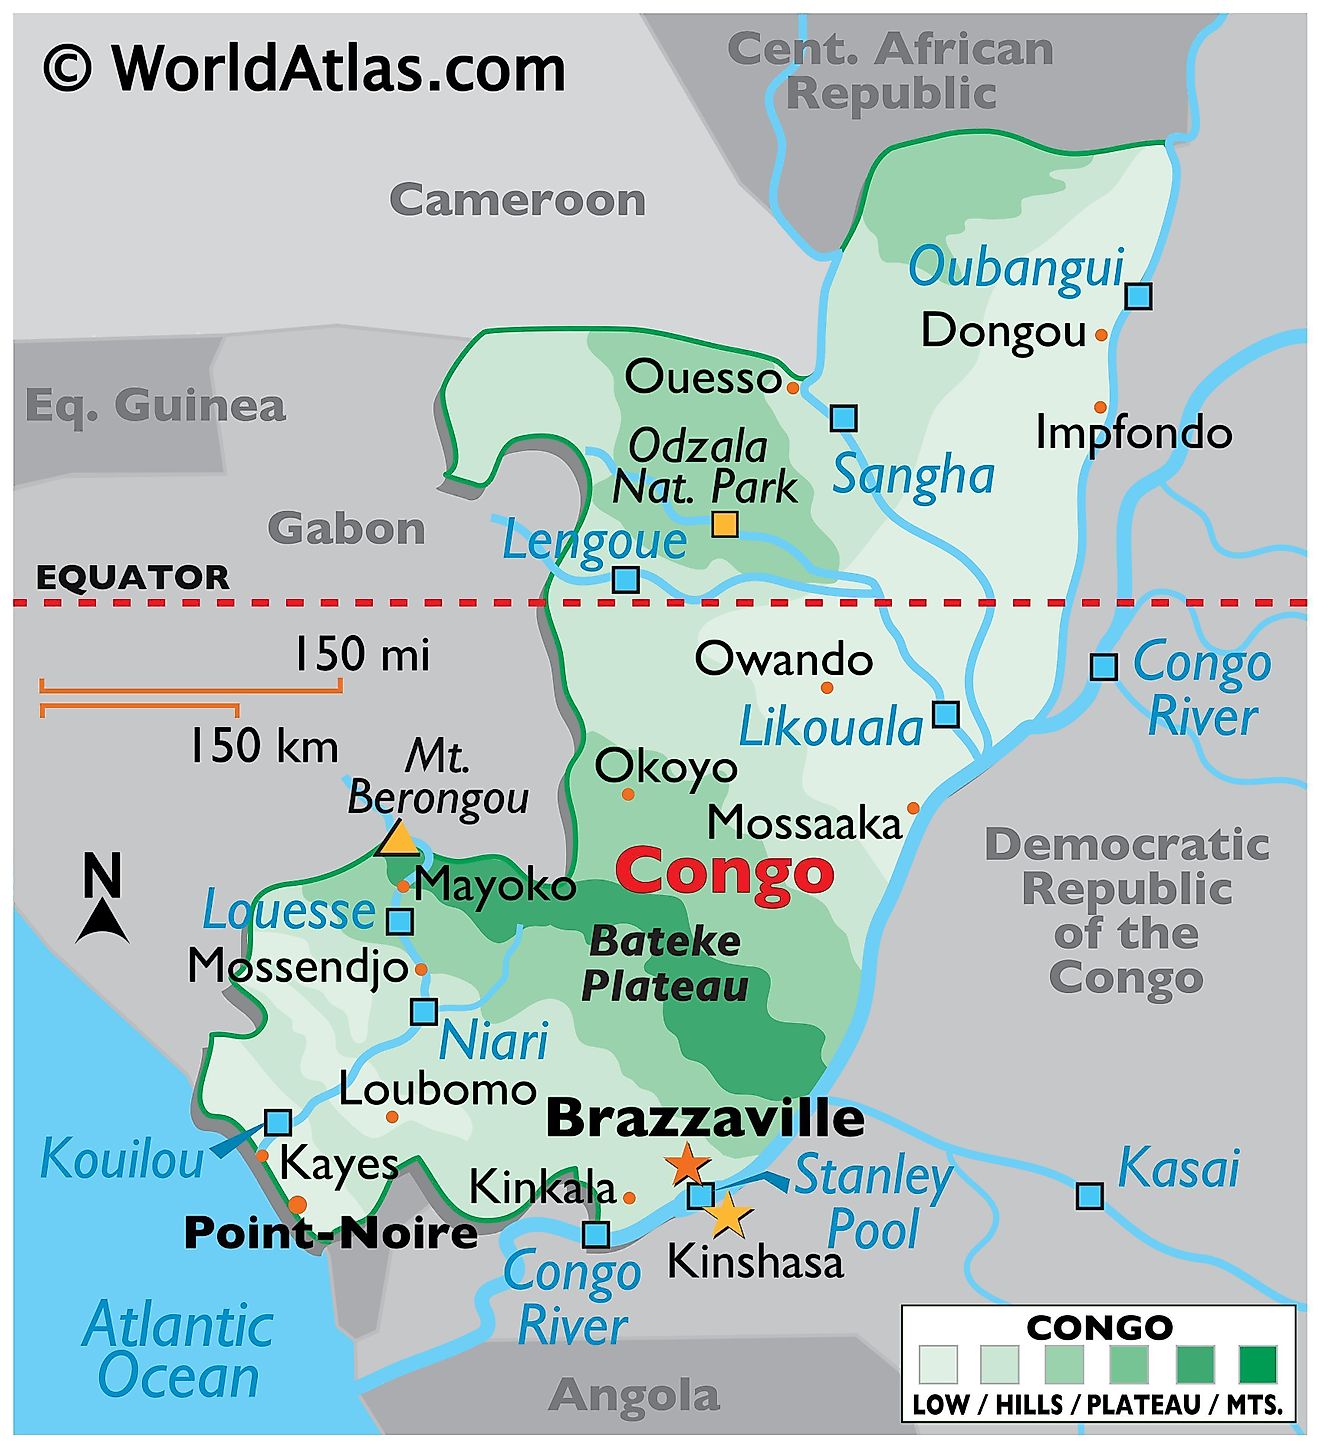 Physical Map of the Republic of the Congo with state boundaries, relief, major physical features like rivers, lakes, mountains, extreme points, etc.